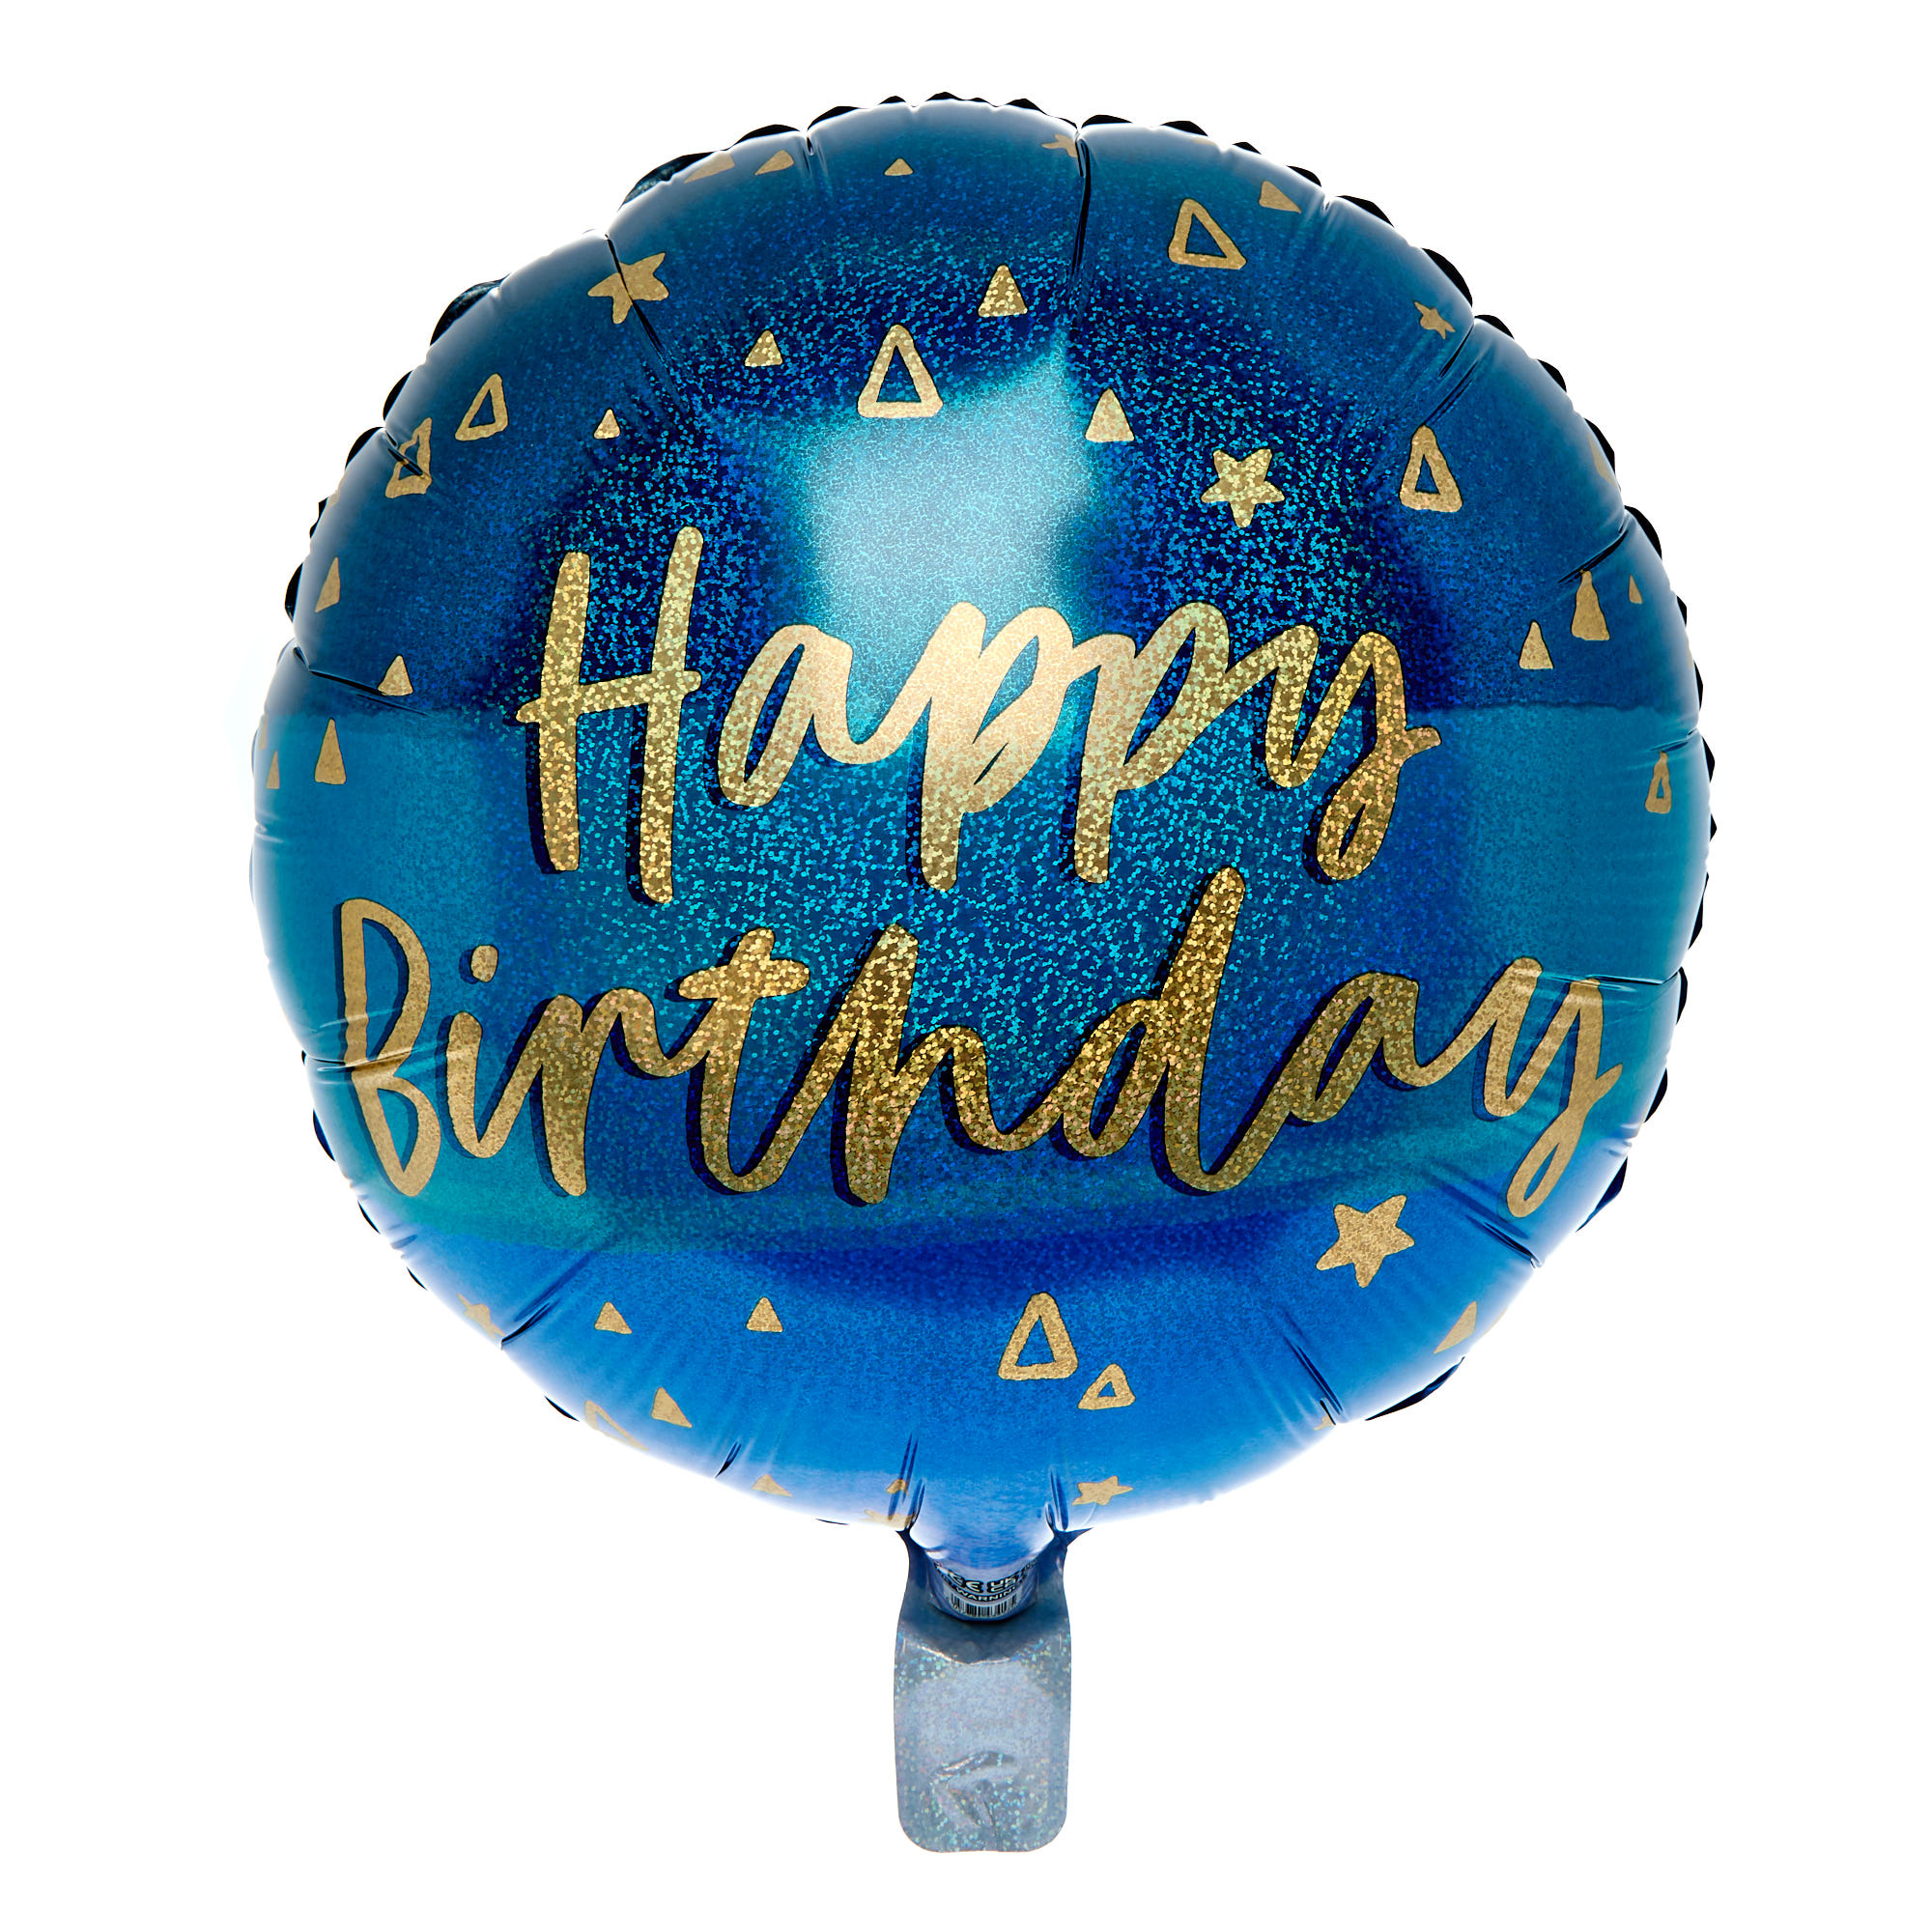 Blue & Gold Happy Birthday Balloon & Lindt Chocolate Box - FREE GIFT CARD!